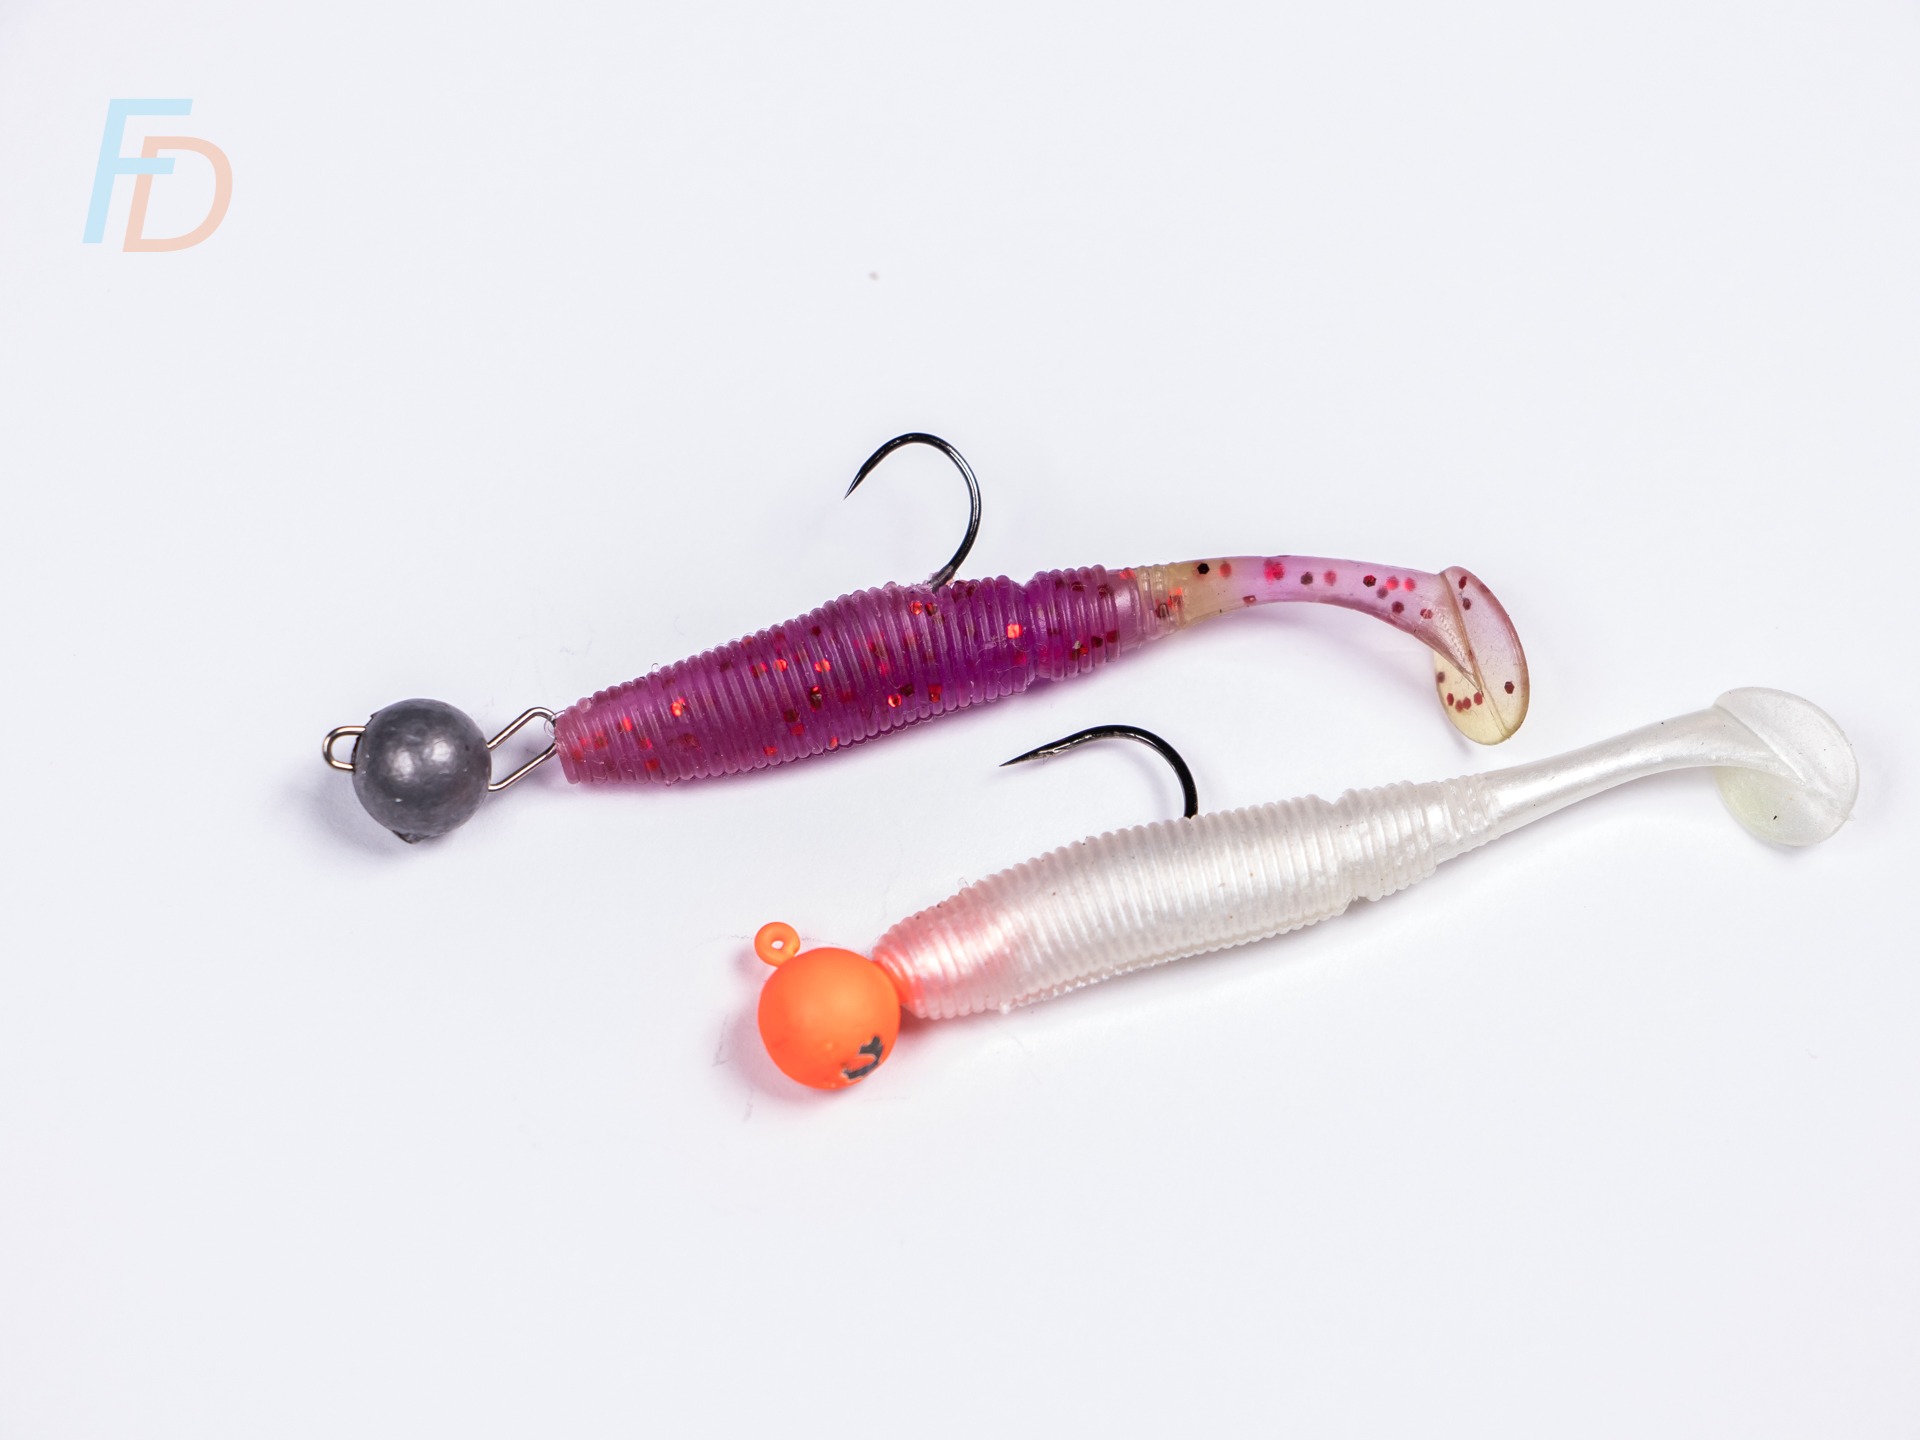 Lure Fishing: Revealing Tactics & Tackle for The “New”(?!) Game in